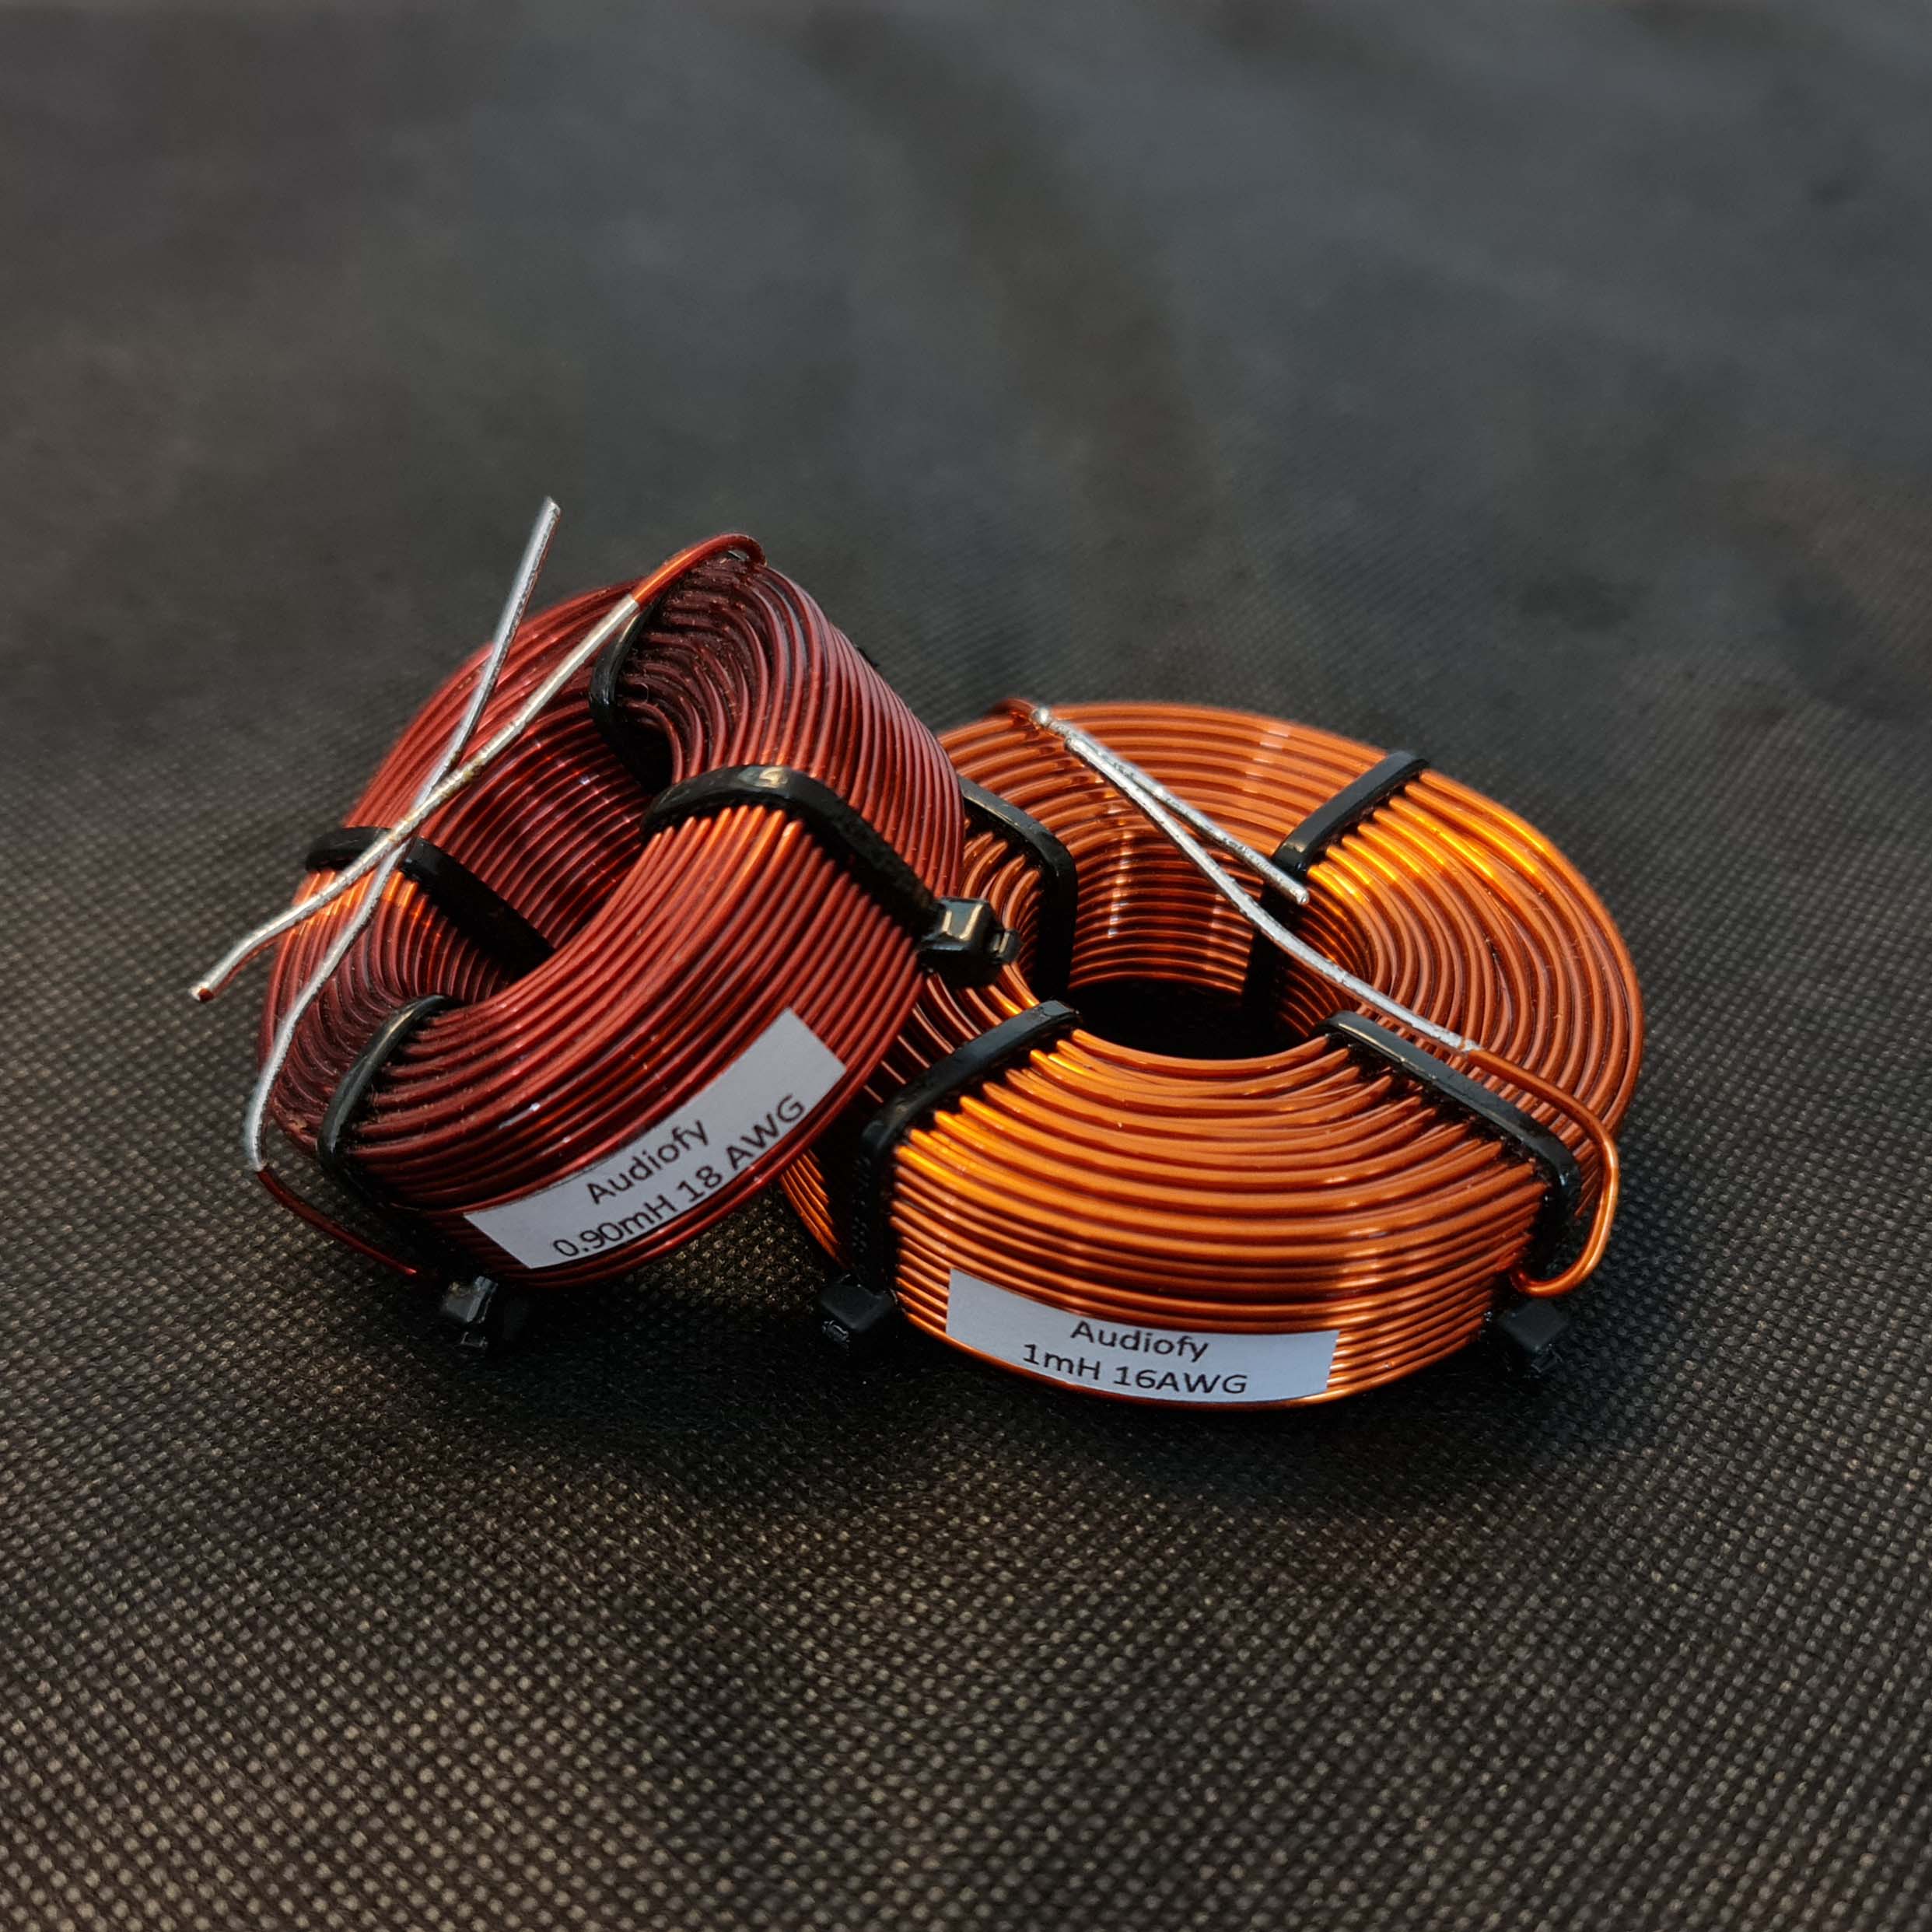 Audiofy 1mH 18 AWG Air Core Crossover Inductor